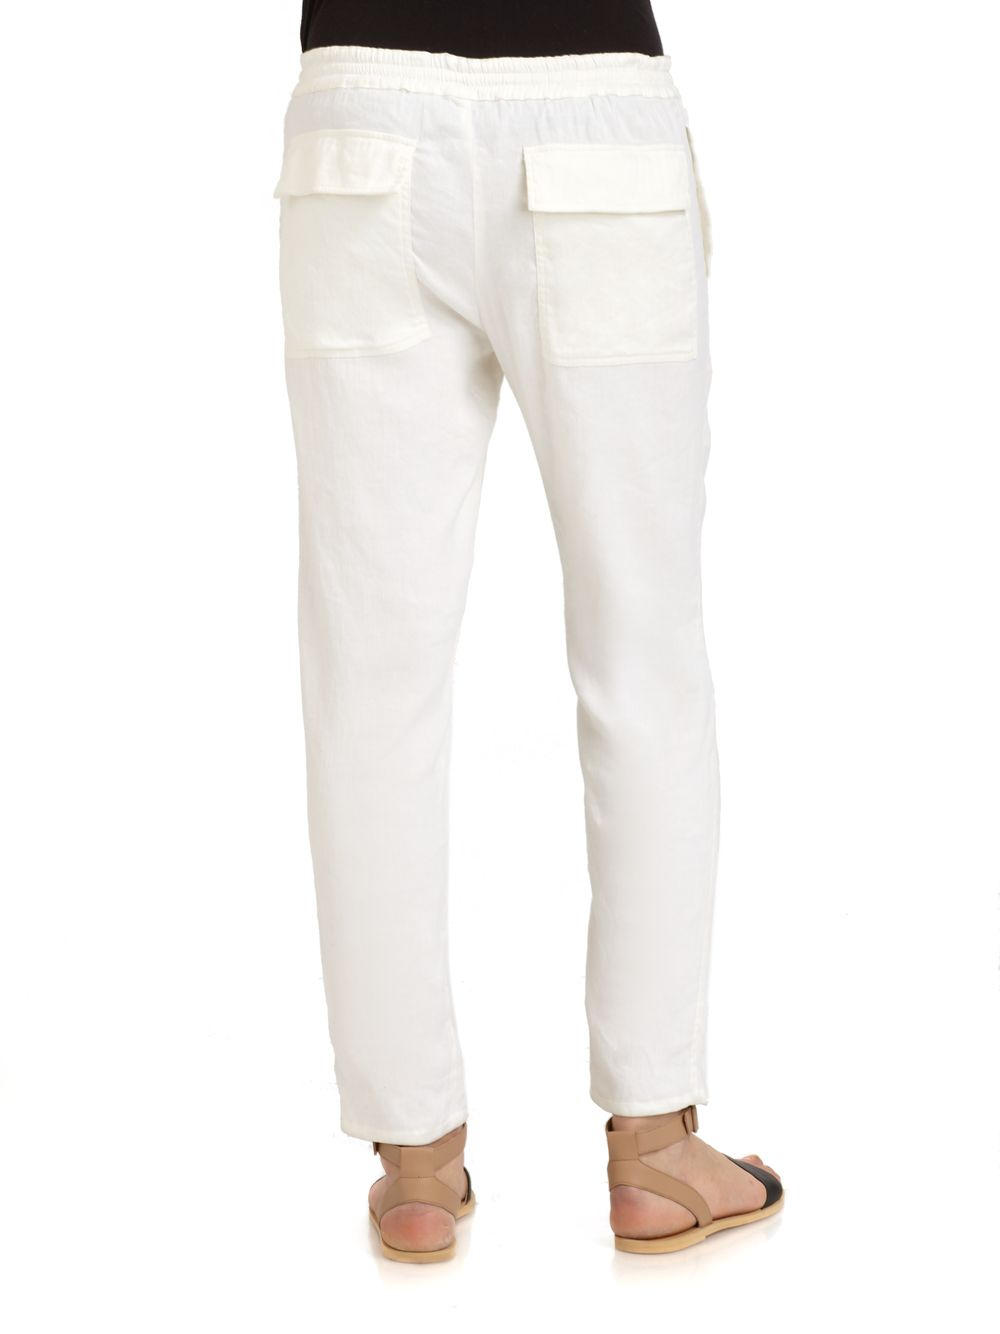 Lyst - Vince Stretch Linen Jogger Pants in White